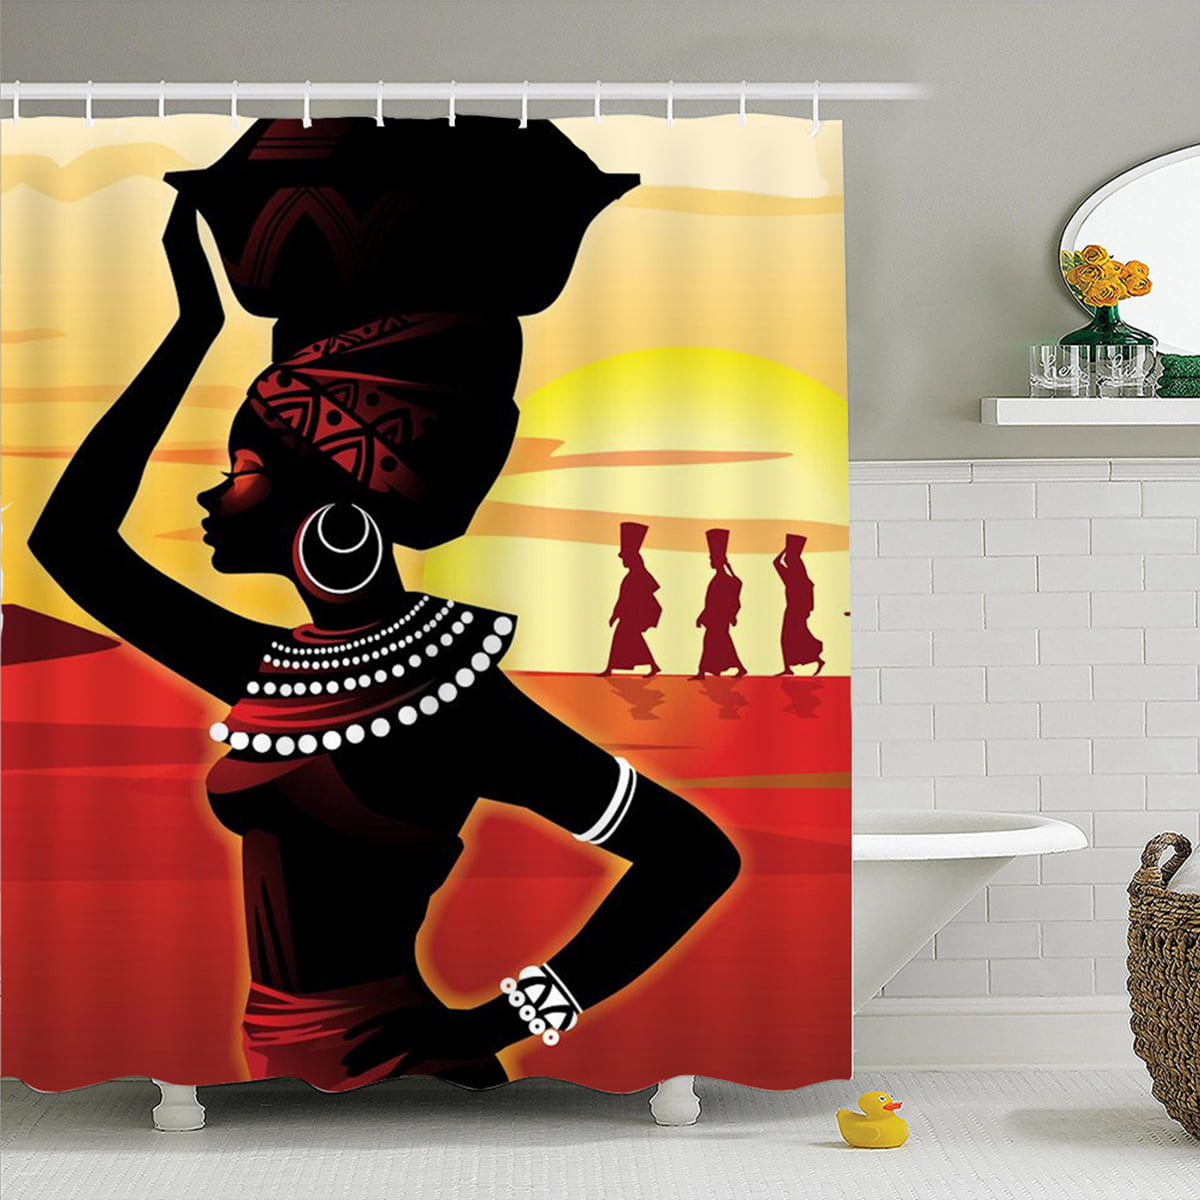 Shower Curtain African Woman and Lions Printing Decor Bath Curtains 12 Hooks